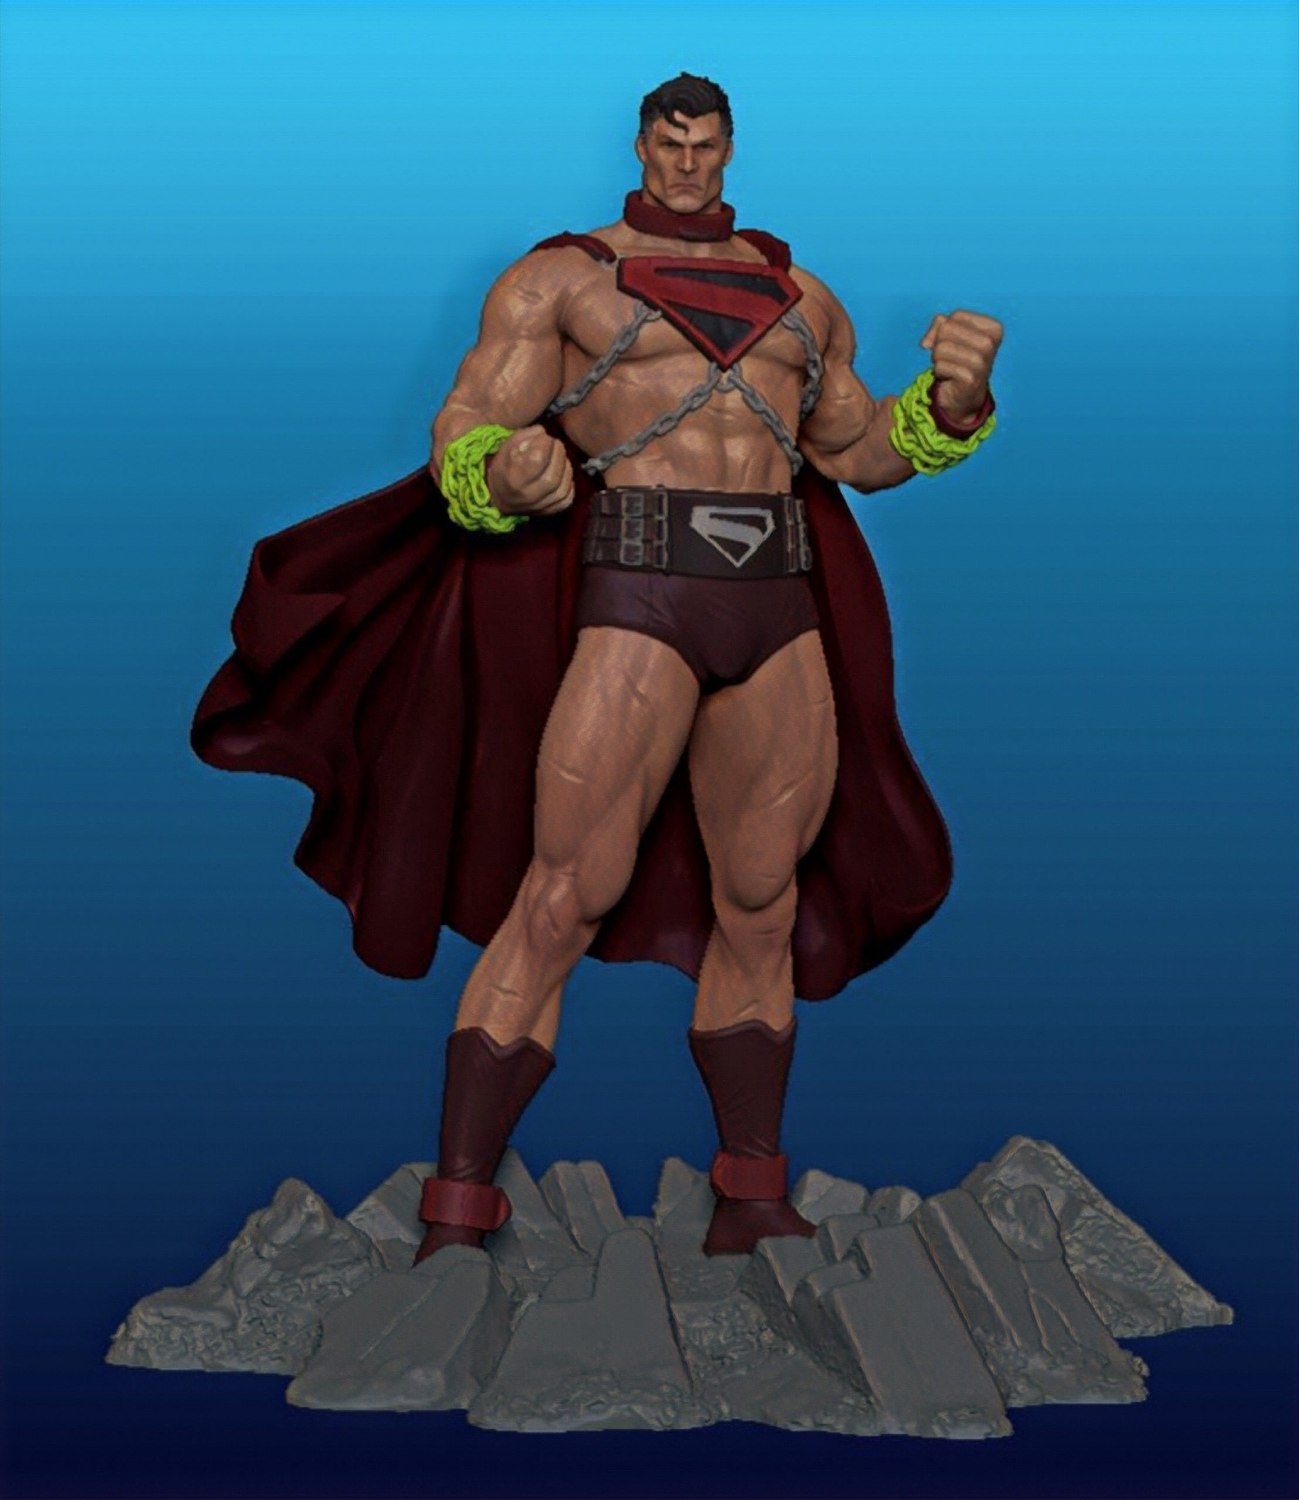 Gladiator Superman from Worlds of War